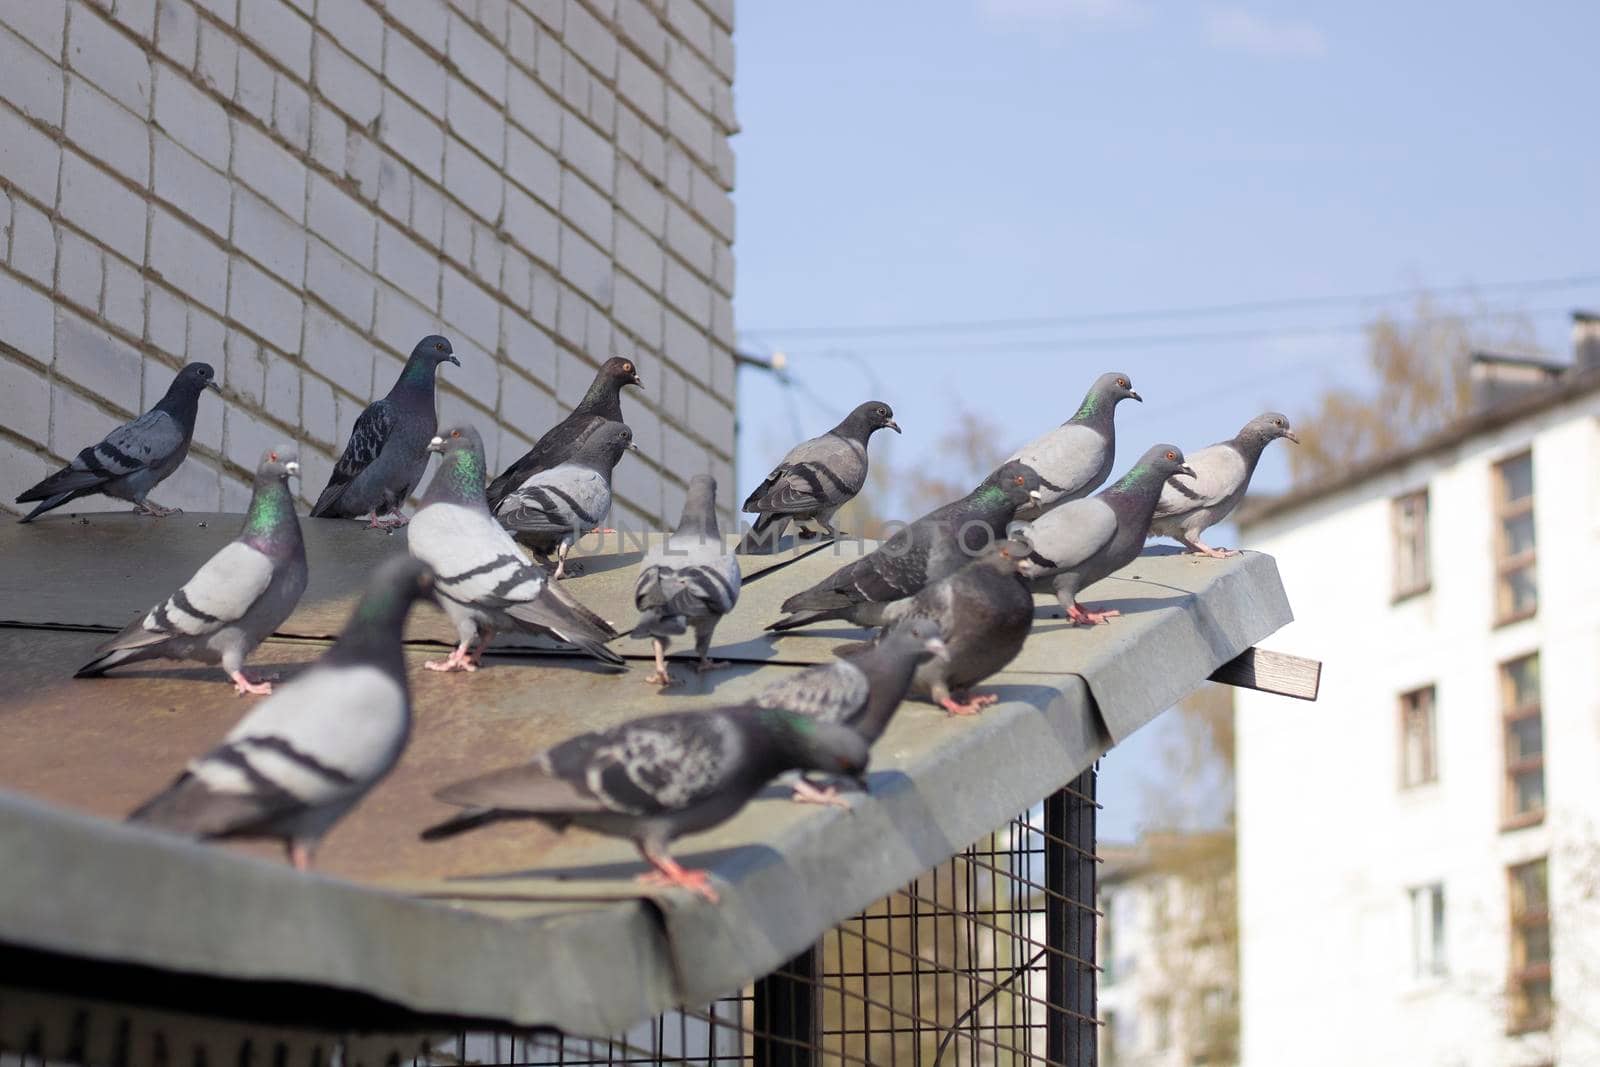 Grey pigeons sit on the roof on the city street. by Sonluna